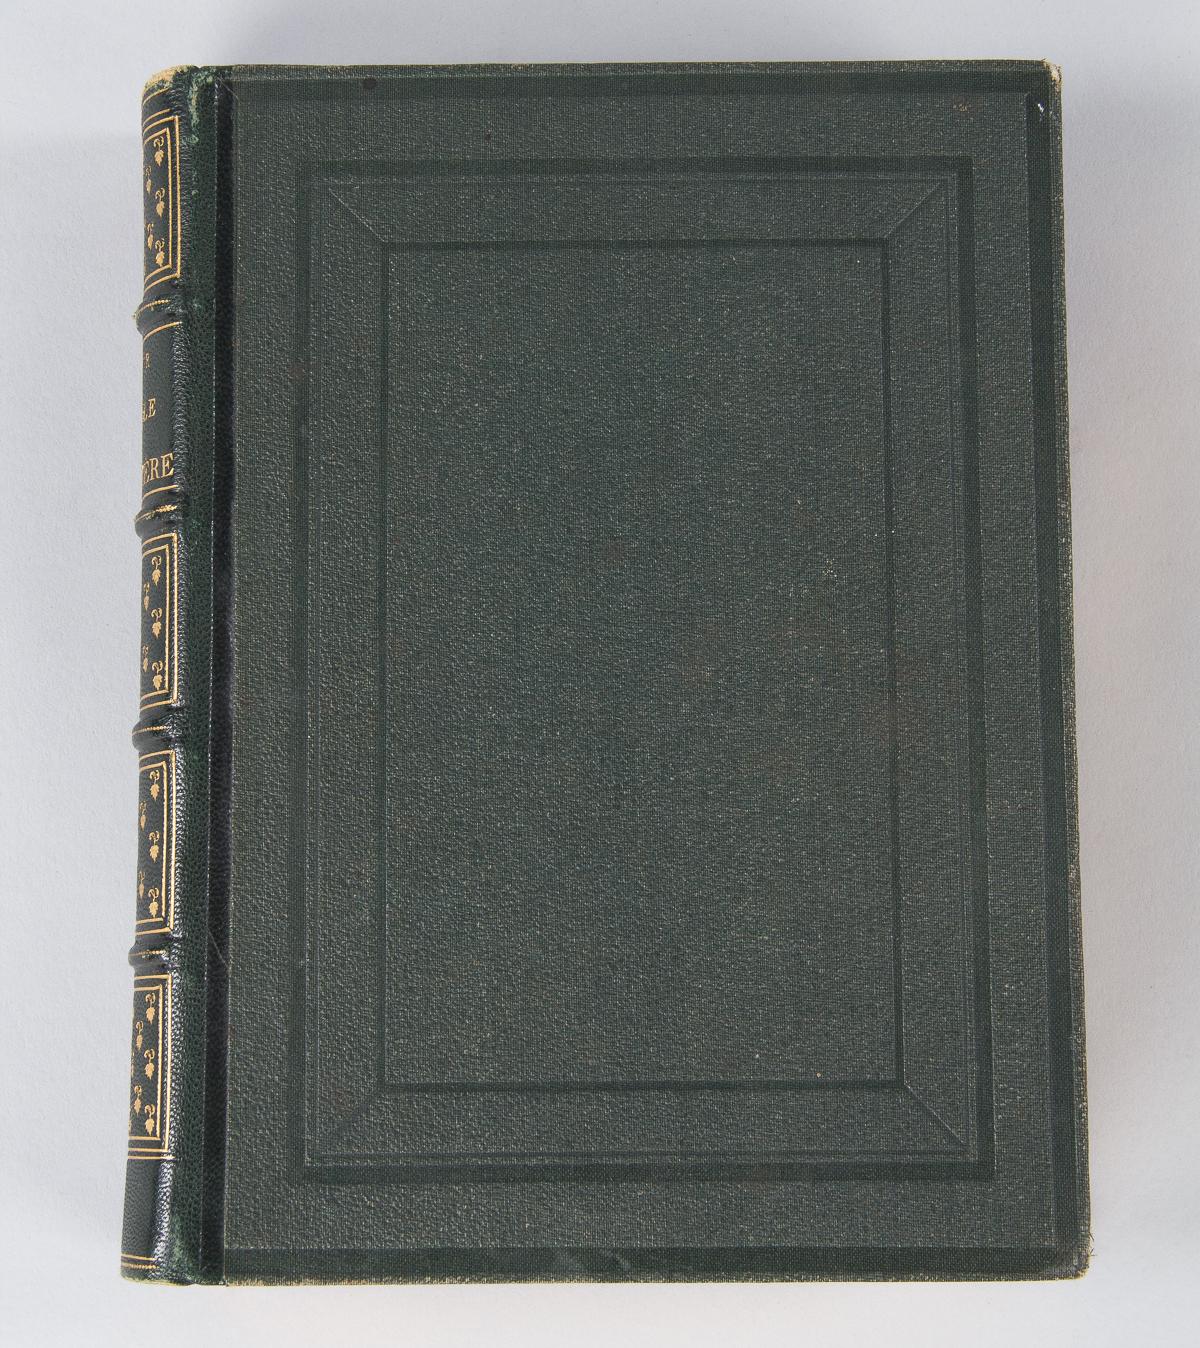 Leather French Book Evangile d'une Grand Mere by Comtesse de Segur, 1866